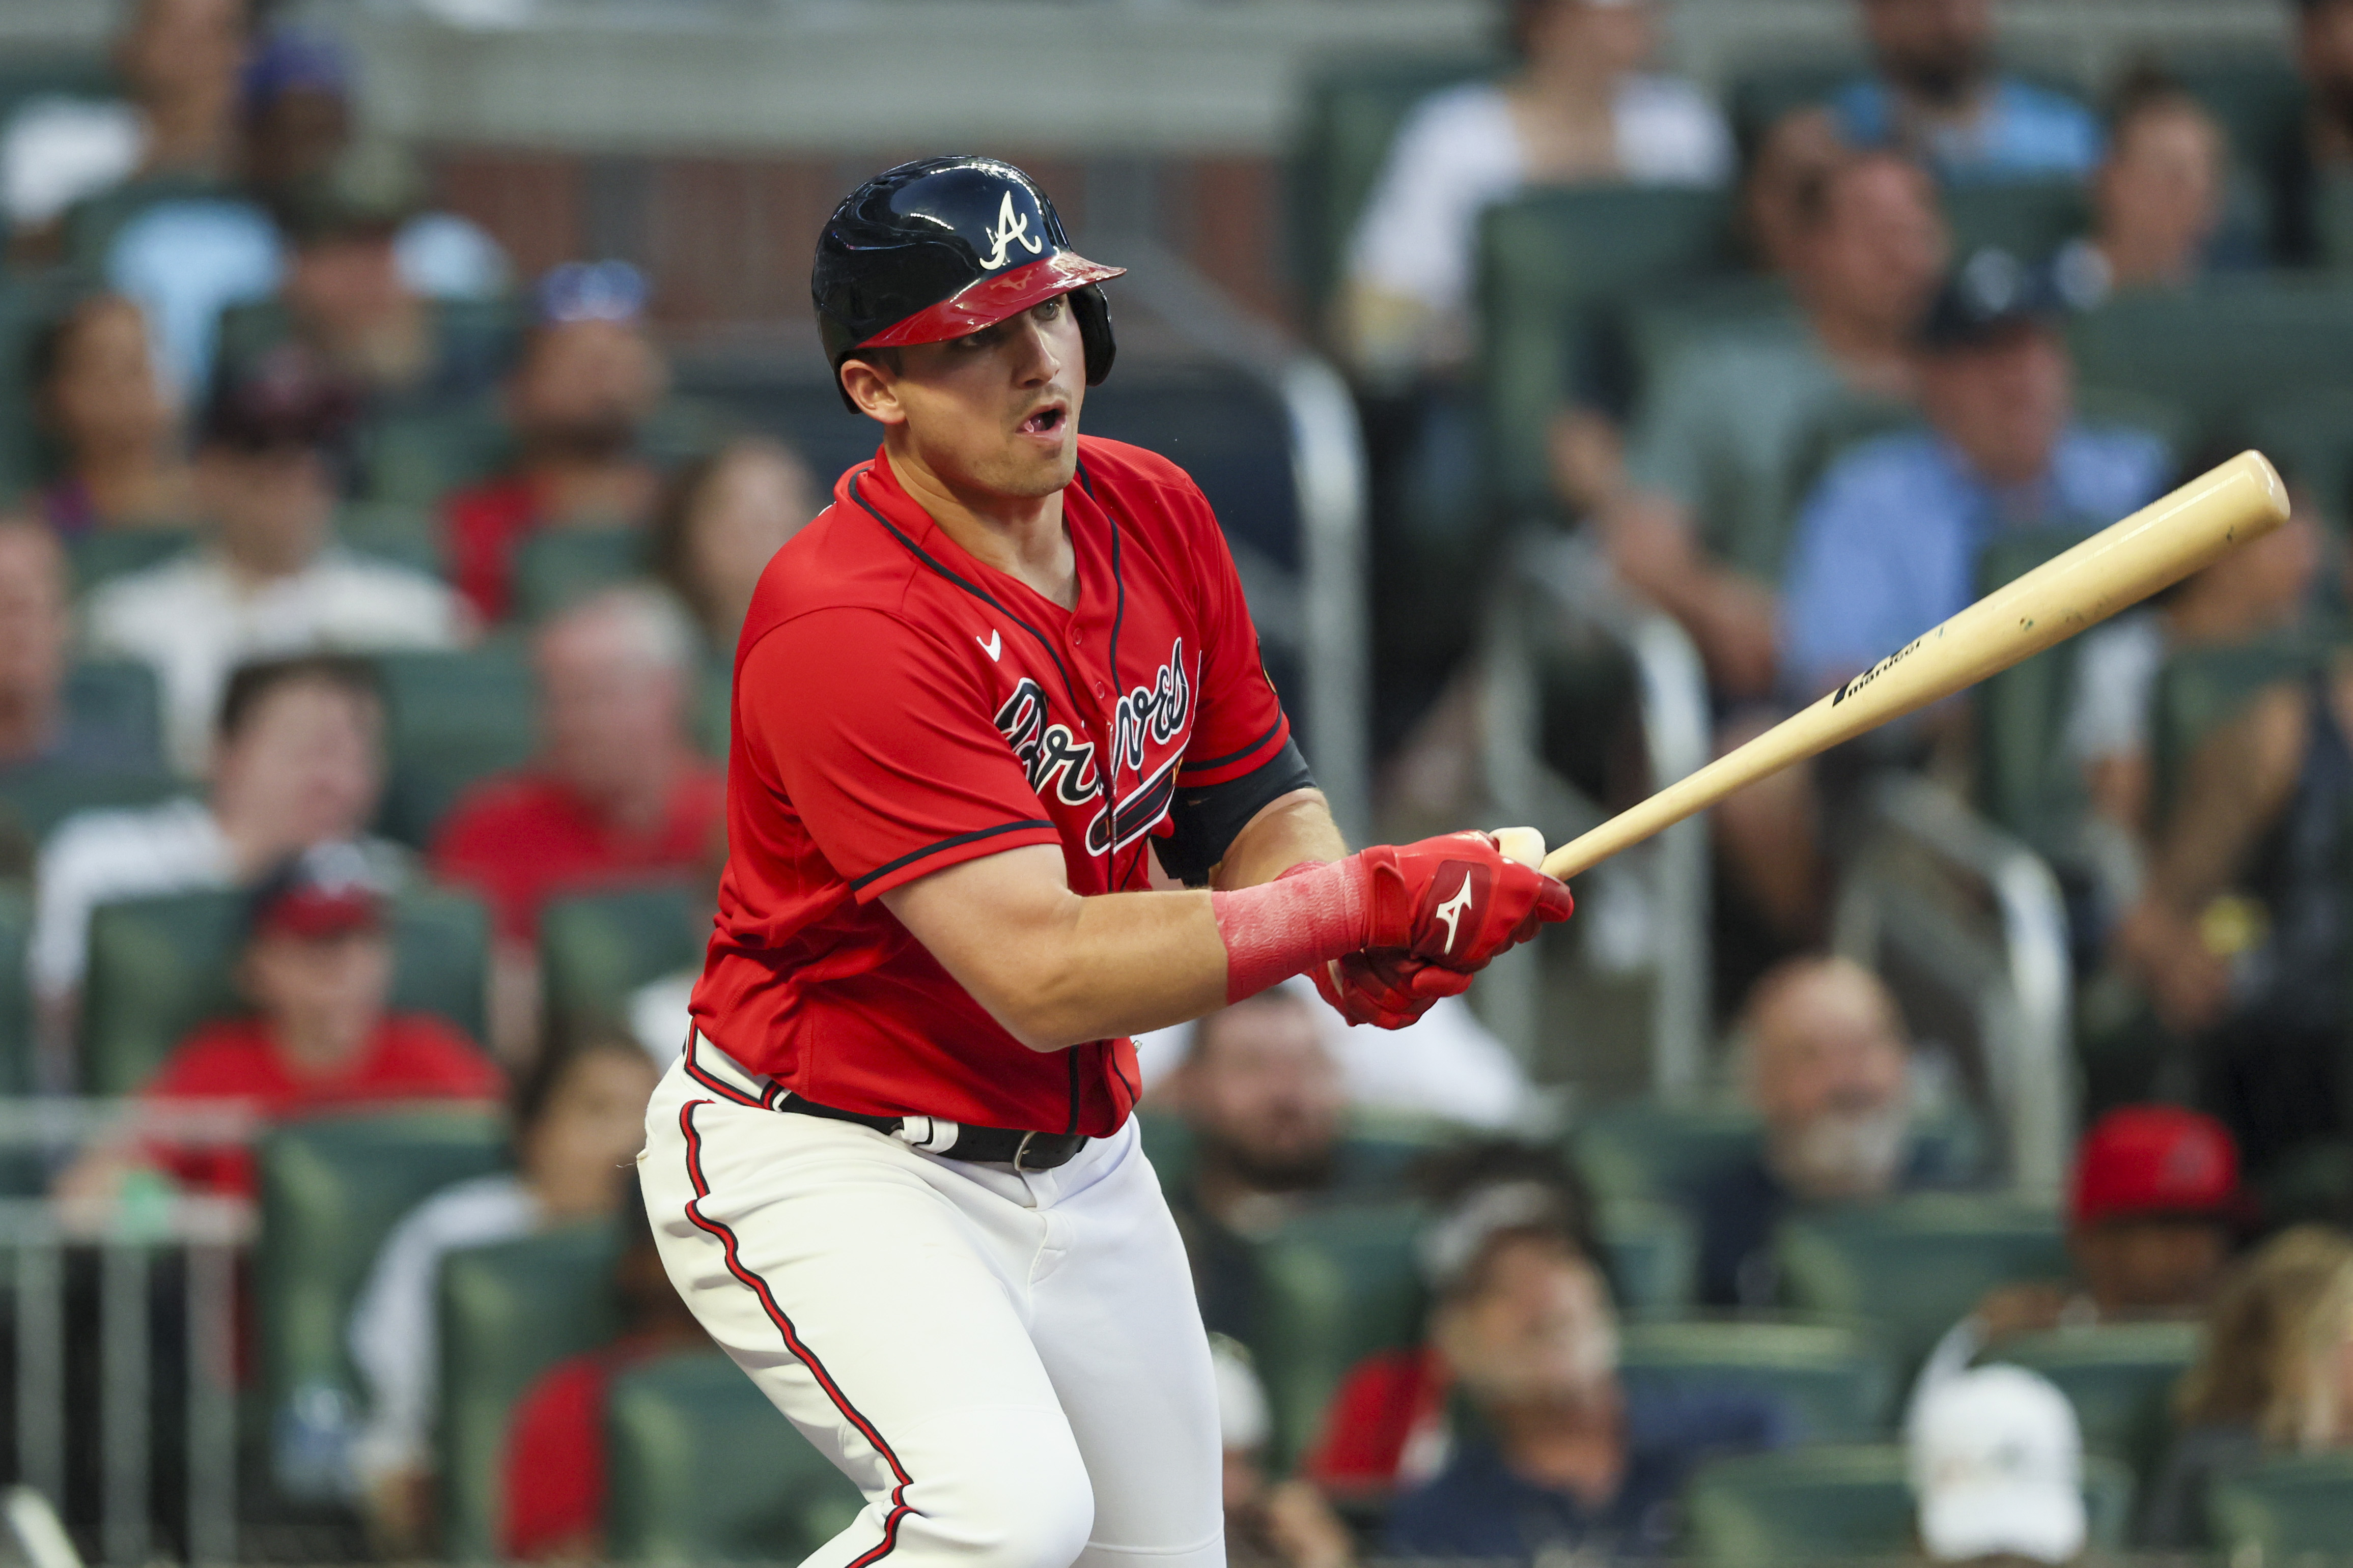 Braves Send Eight Players to All-Star Game - Atlanta Jewish Times